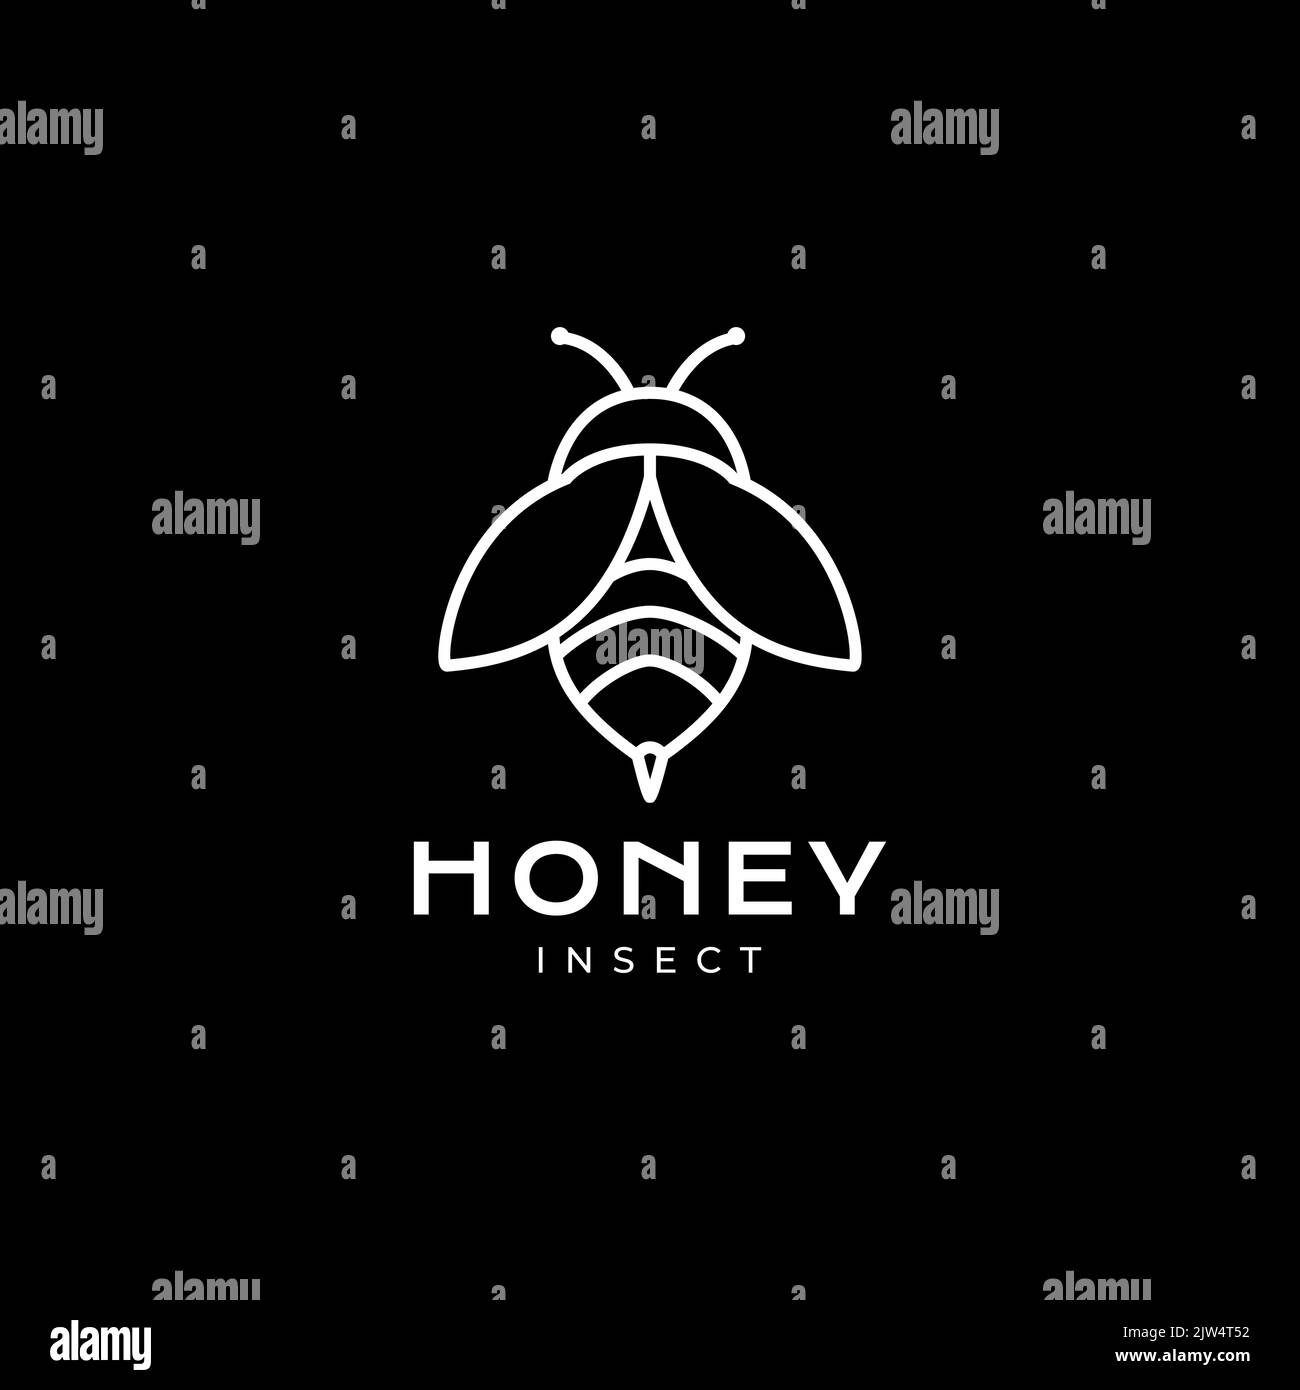 Queen bee logo Black and White Stock Photos & Images - Alamy